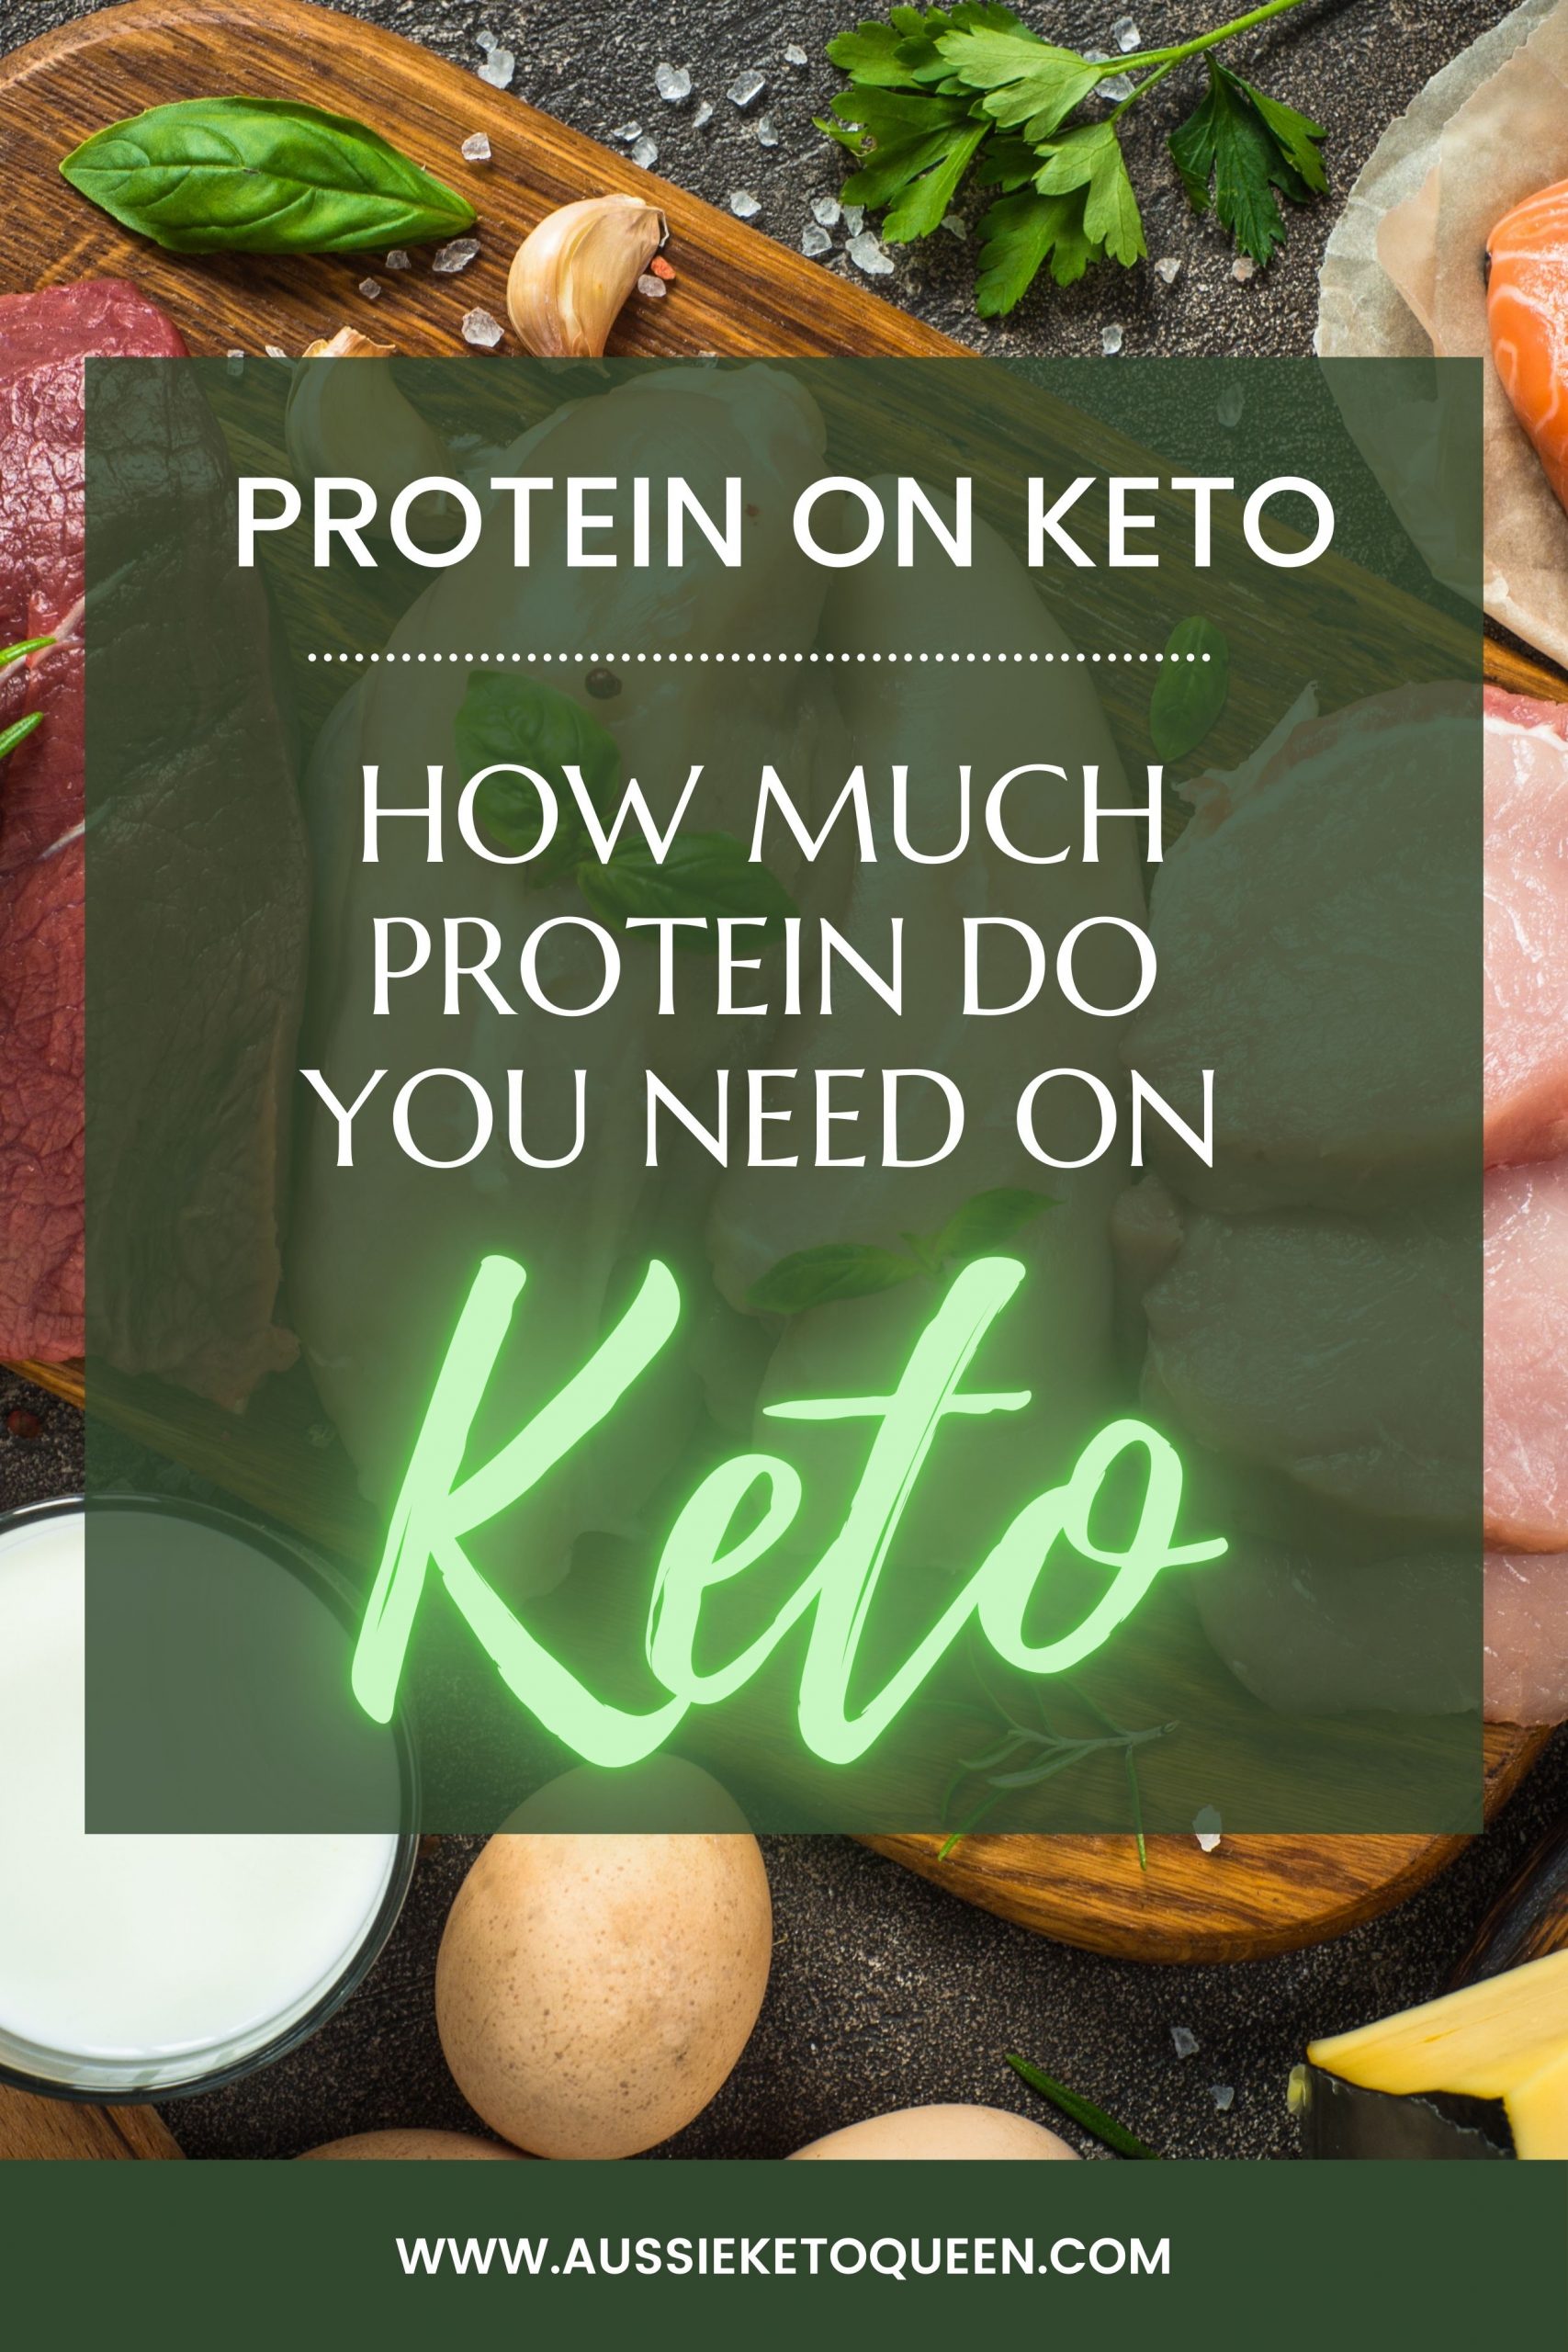 Protein on Keto – How much protein do you need on Keto?